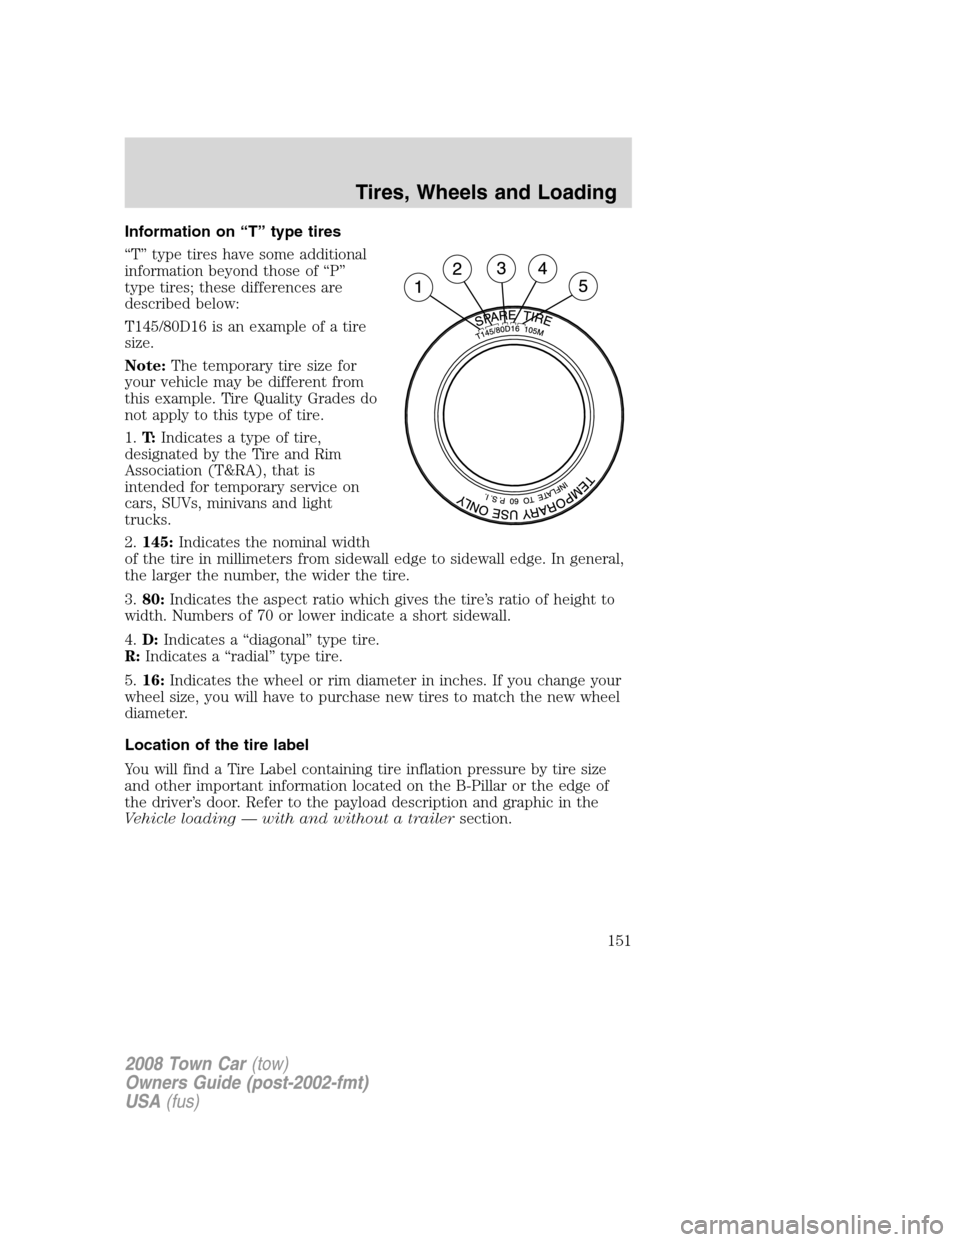 LINCOLN TOWN CAR 2008  Owners Manual Information on “T” type tires
“T” type tires have some additional
information beyond those of “P”
type tires; these differences are
described below:
T145/80D16 is an example of a tire
size